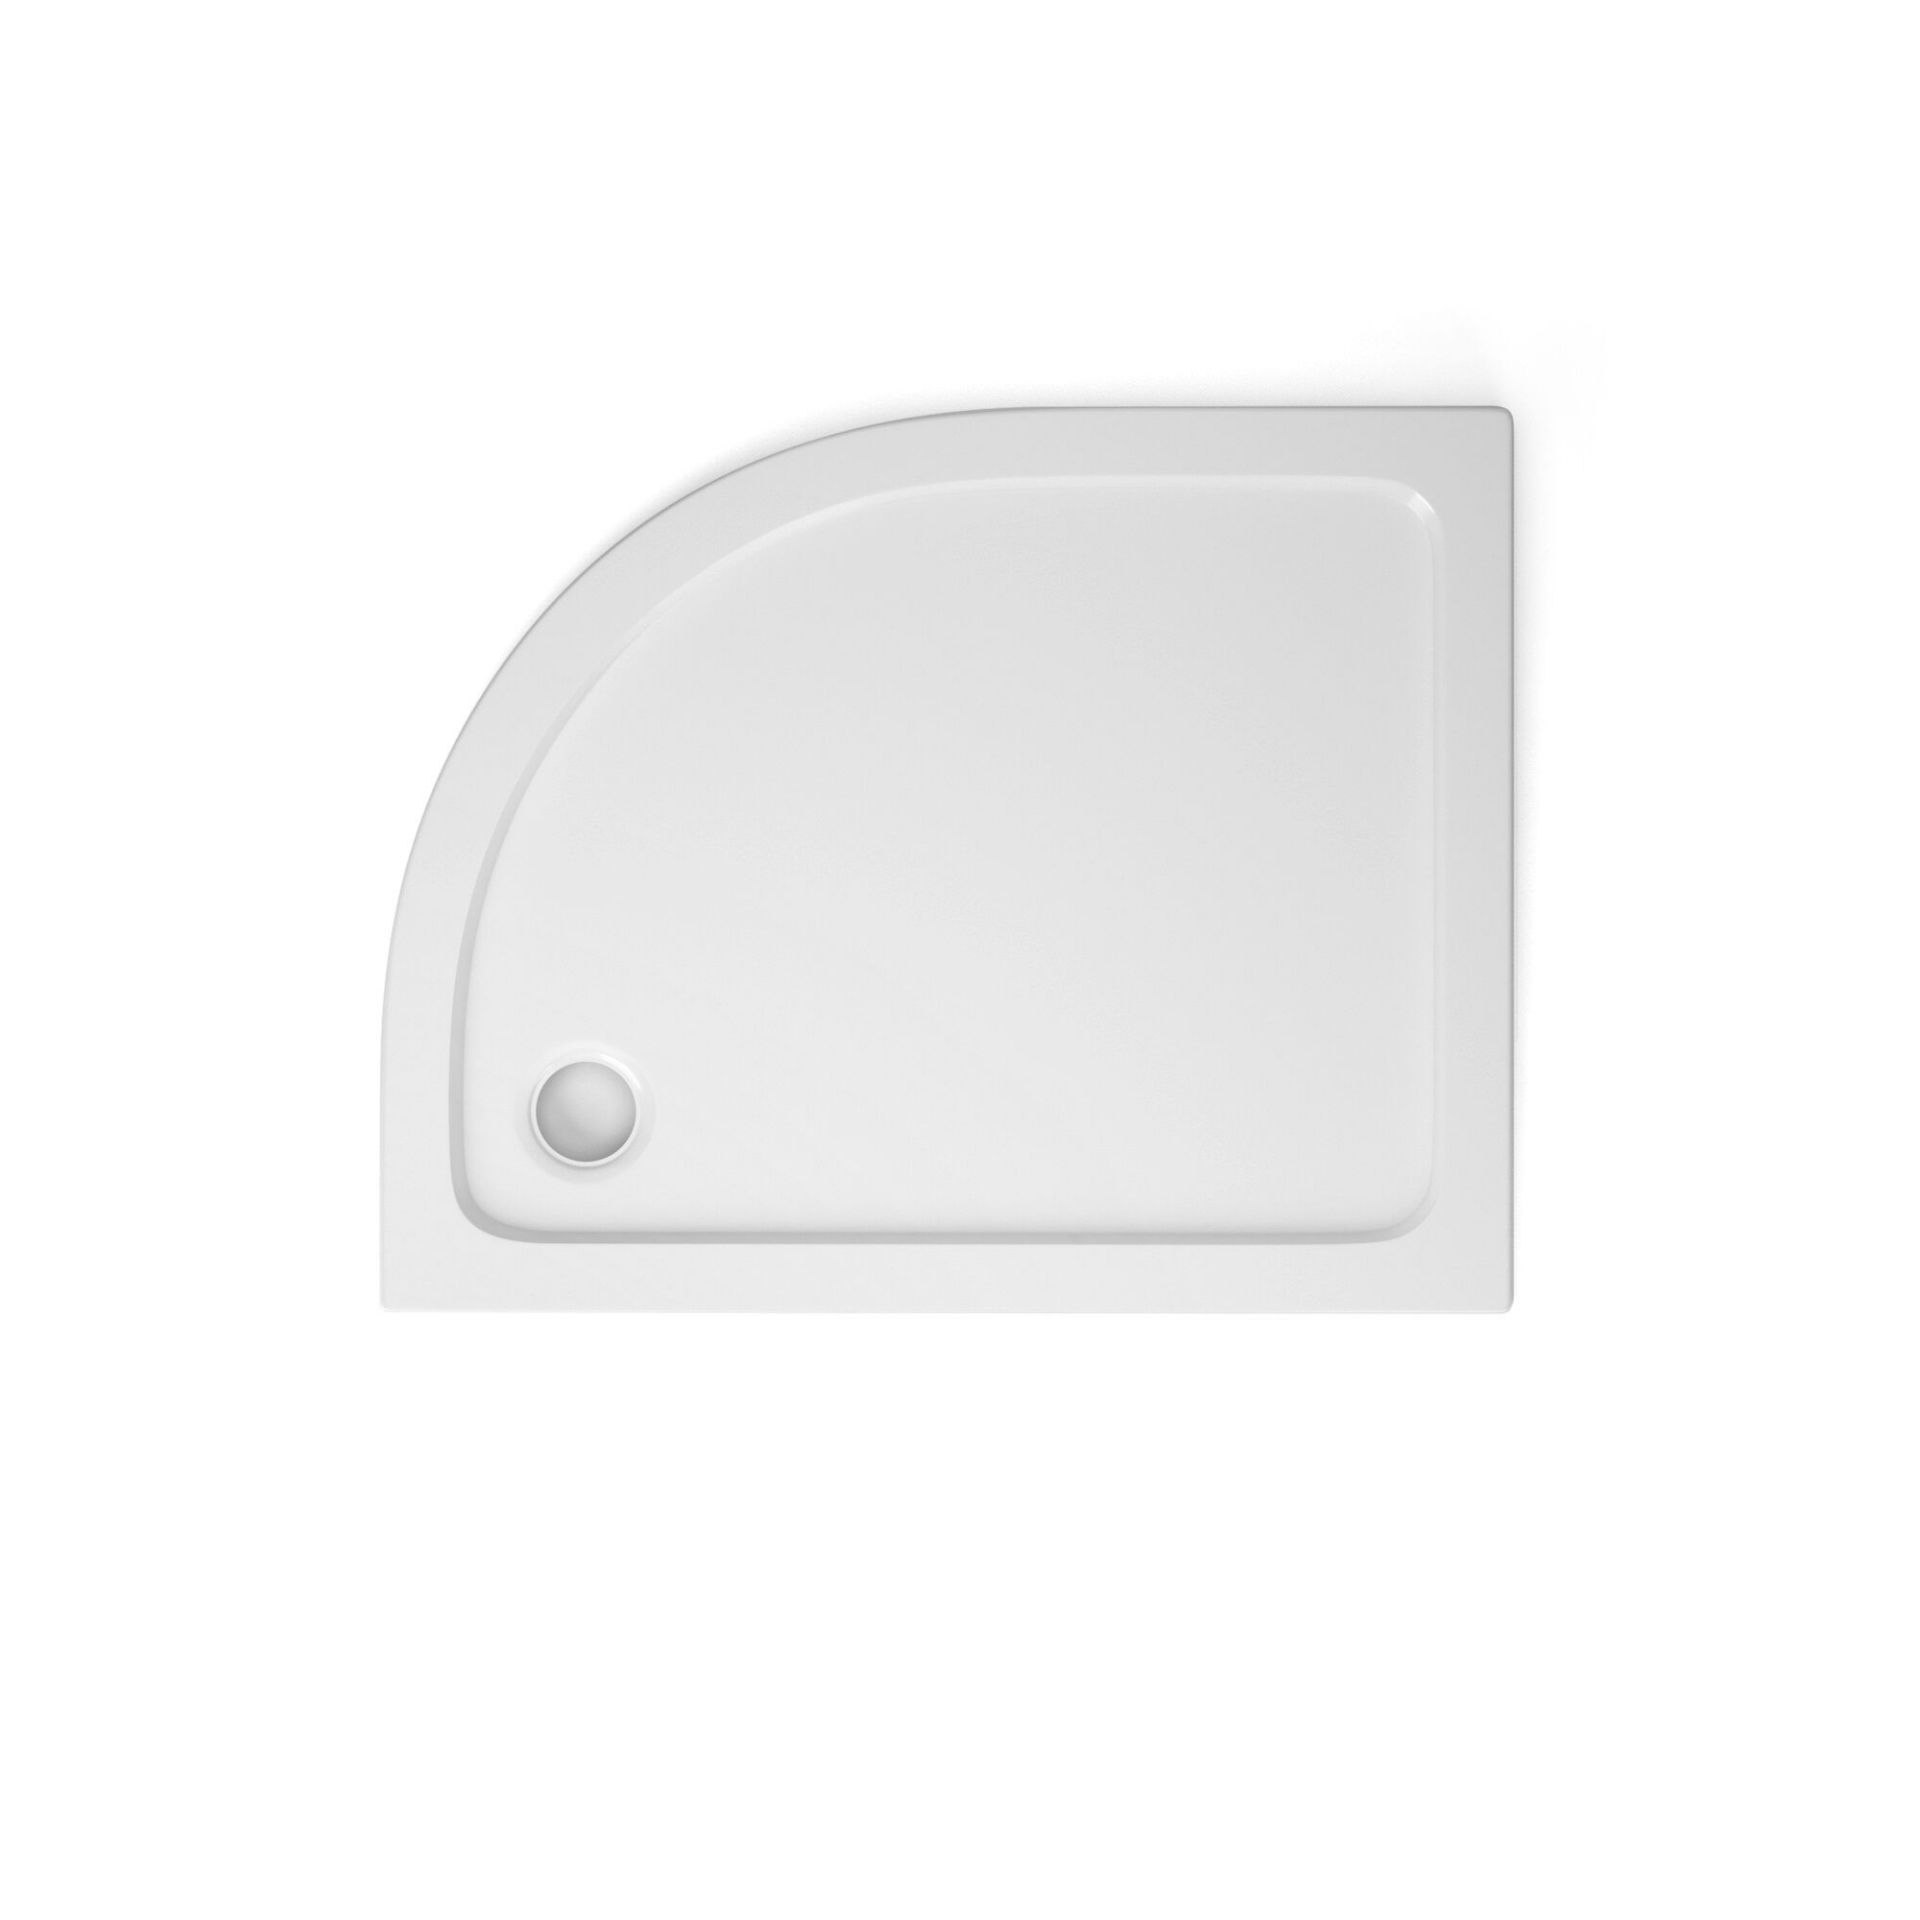 (KL27) 1000x800mm Offset Quadrant Ultra Slim Shower Tray - Right. RRP £249.99. Constructed from